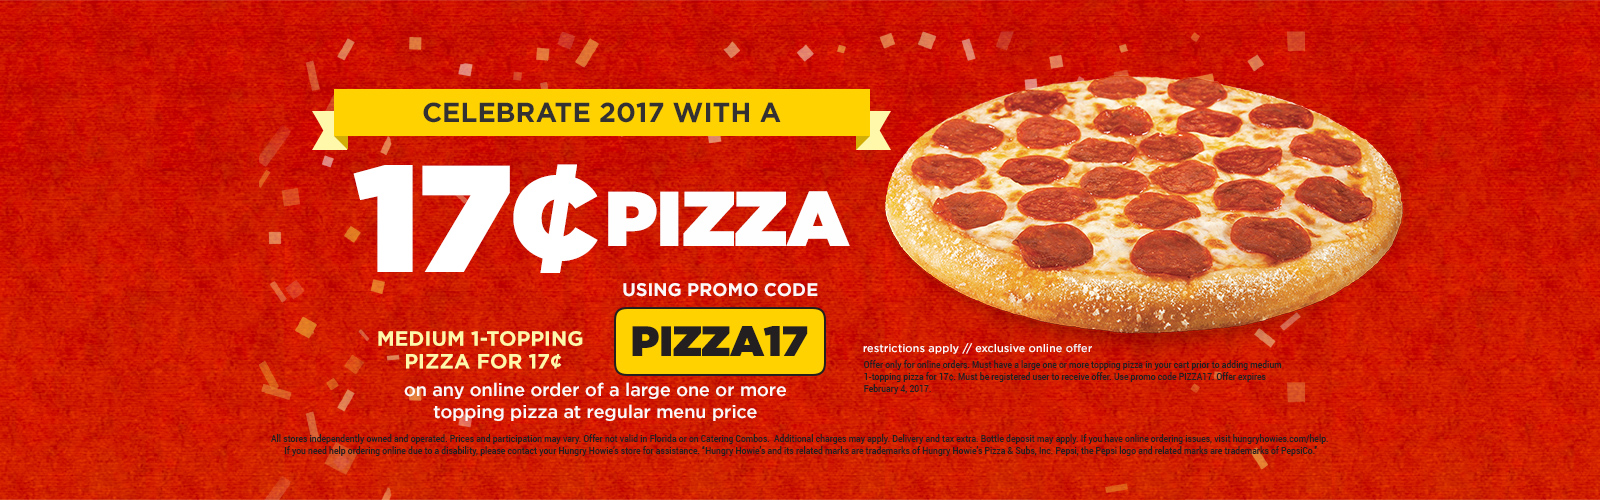 Hungry Howies 17 Cents Pizza See Deal